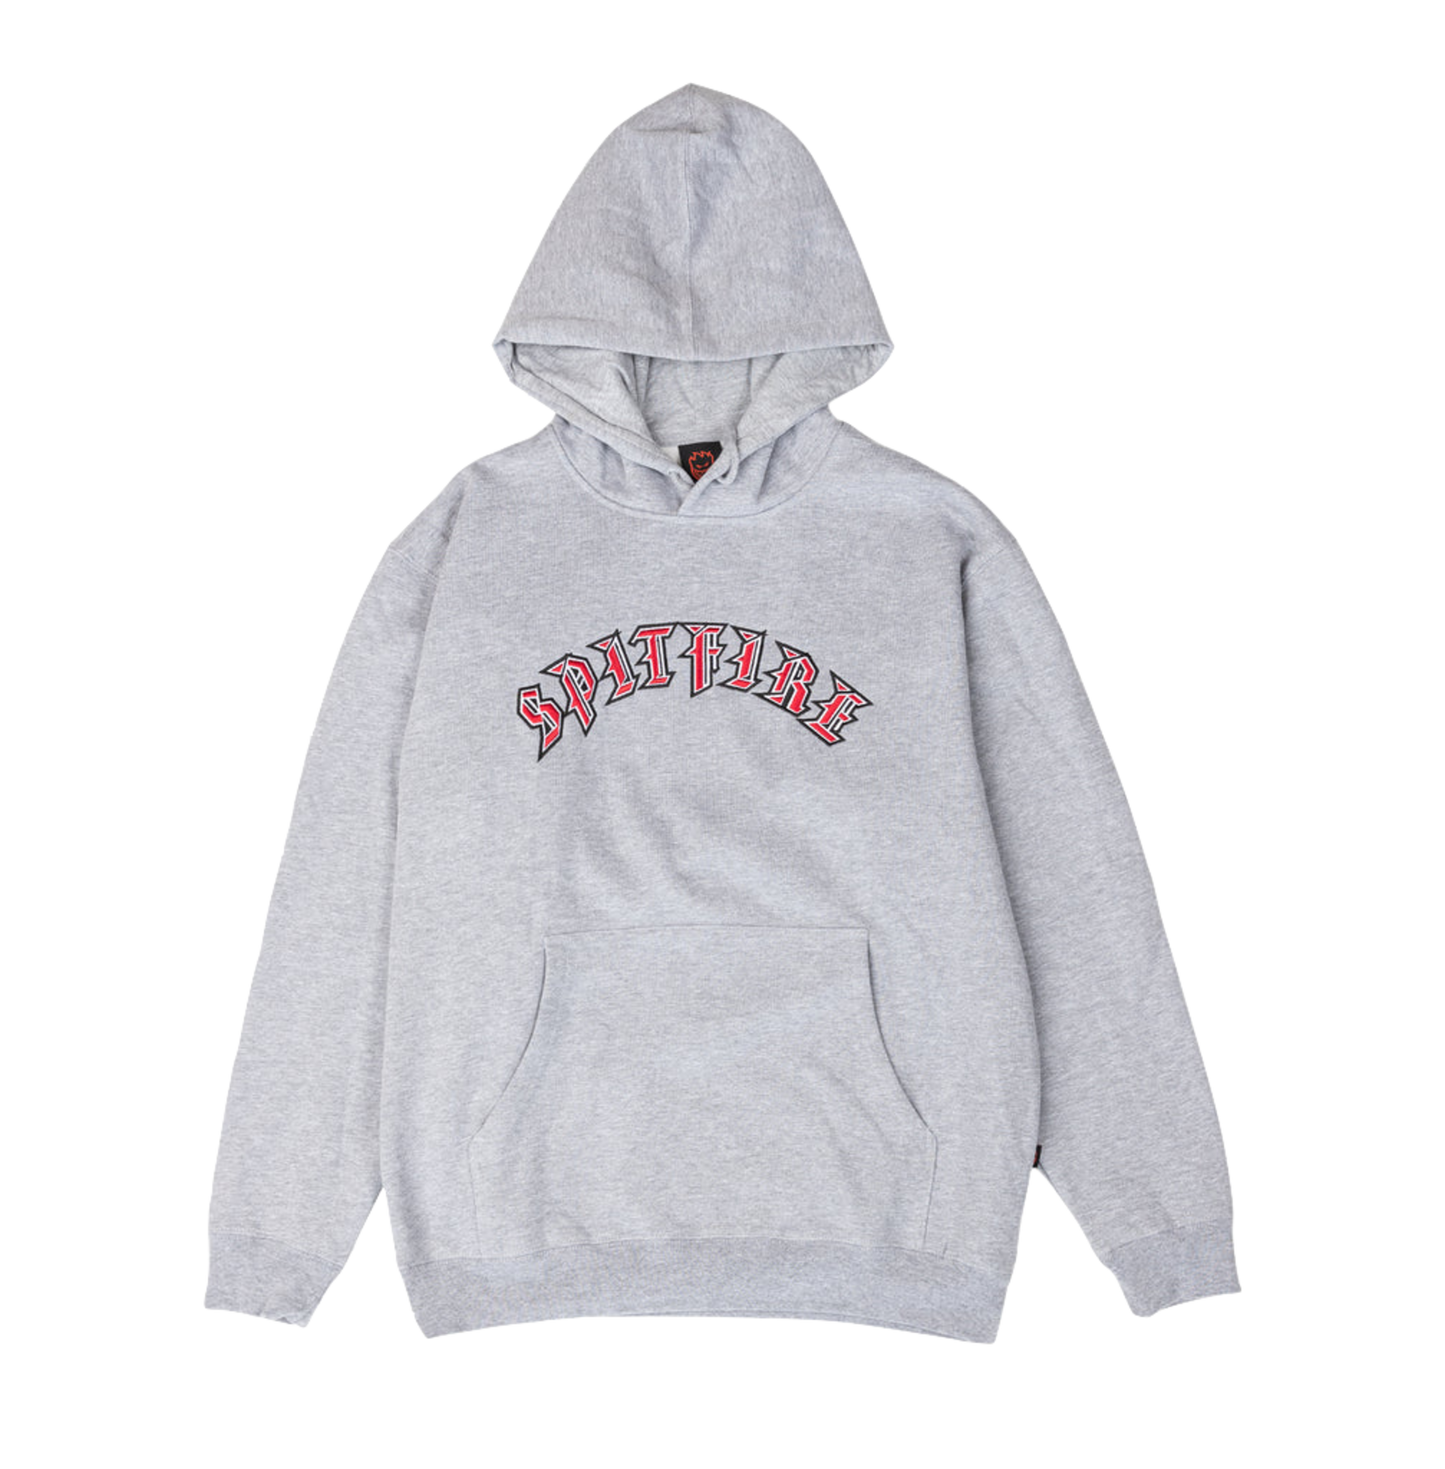 SPITFIRE OLD E CUSTOM PULLOVER HOODED SWEATSHIRT EMBROIDERY GREY HEATHER